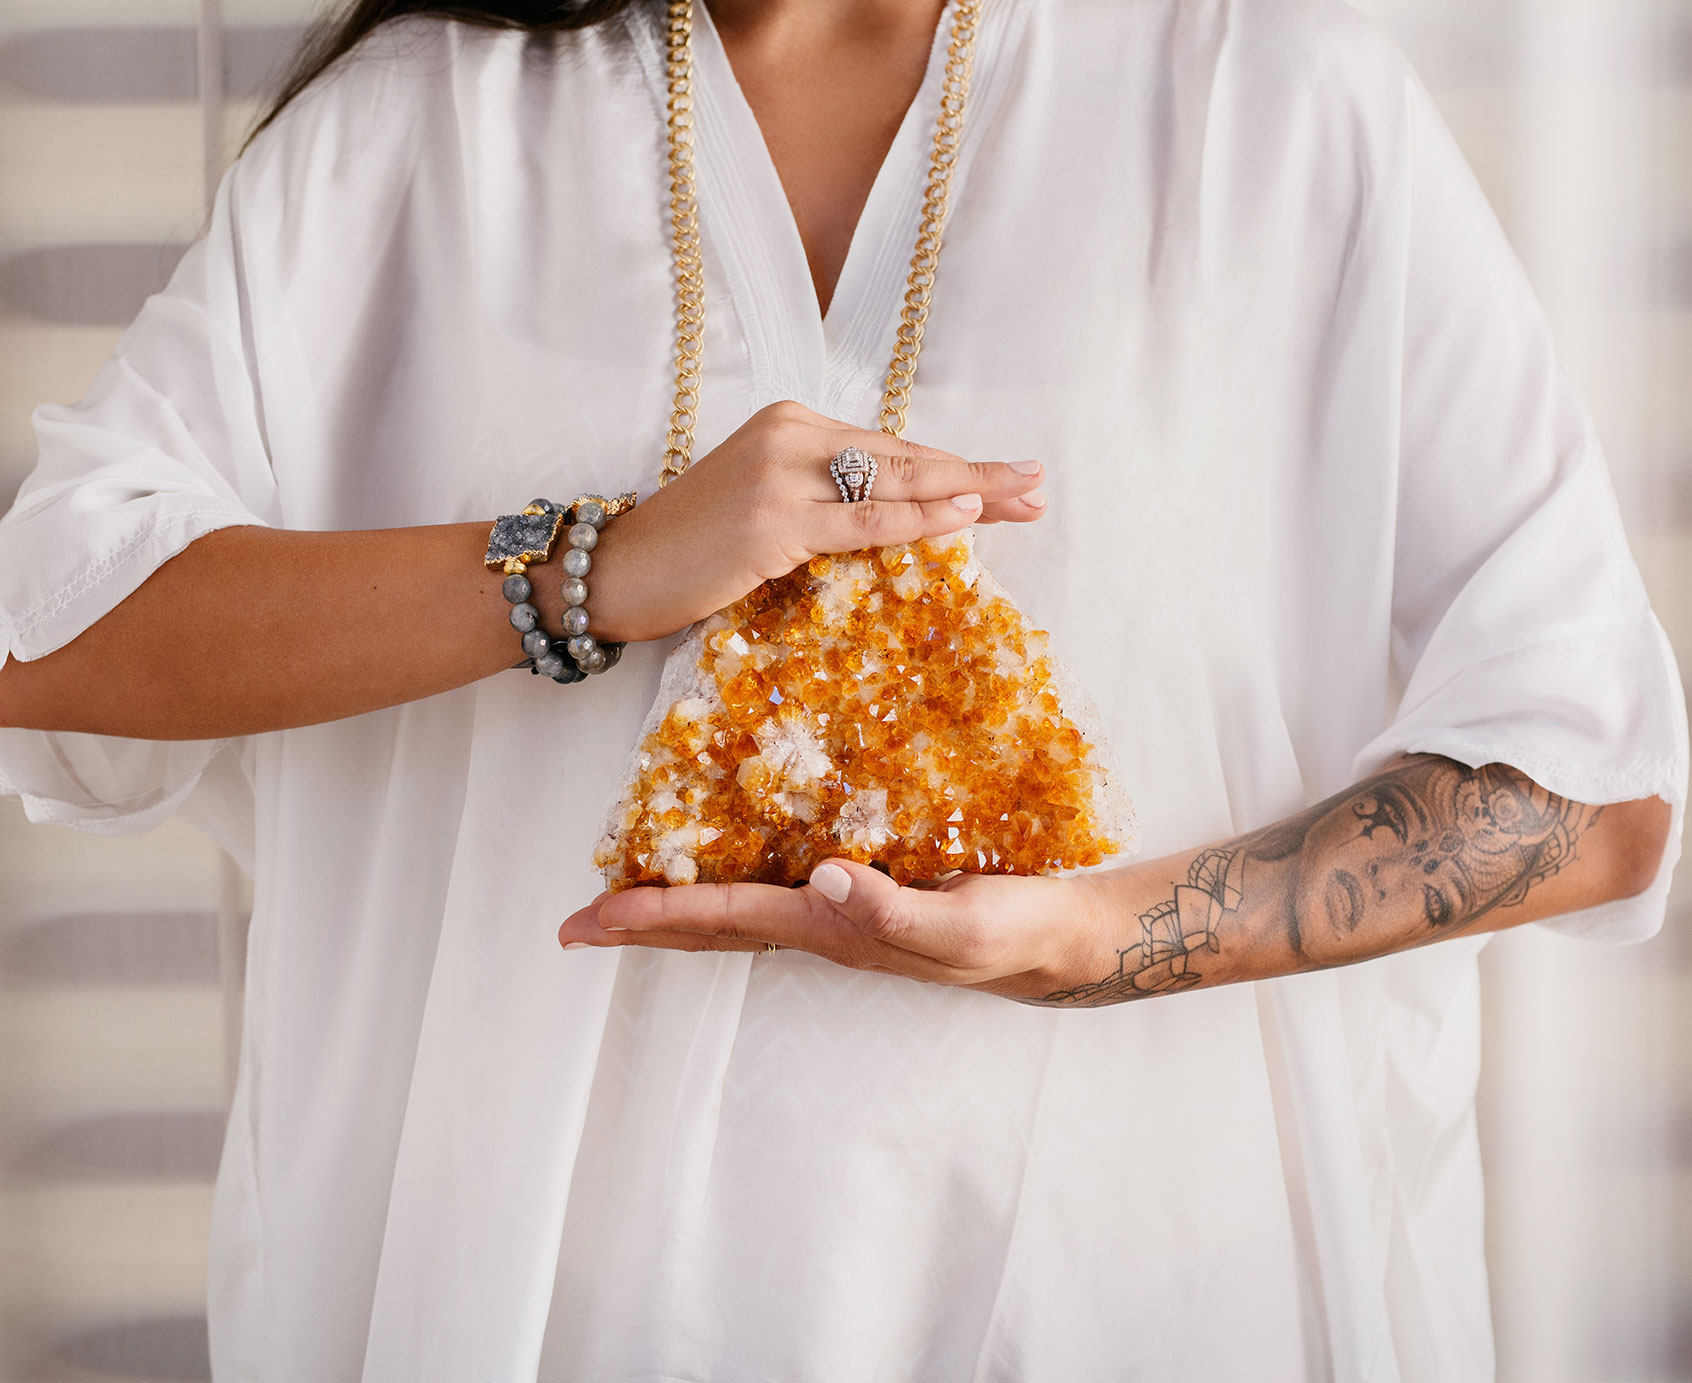 Woman dressed in white holding a large geode.